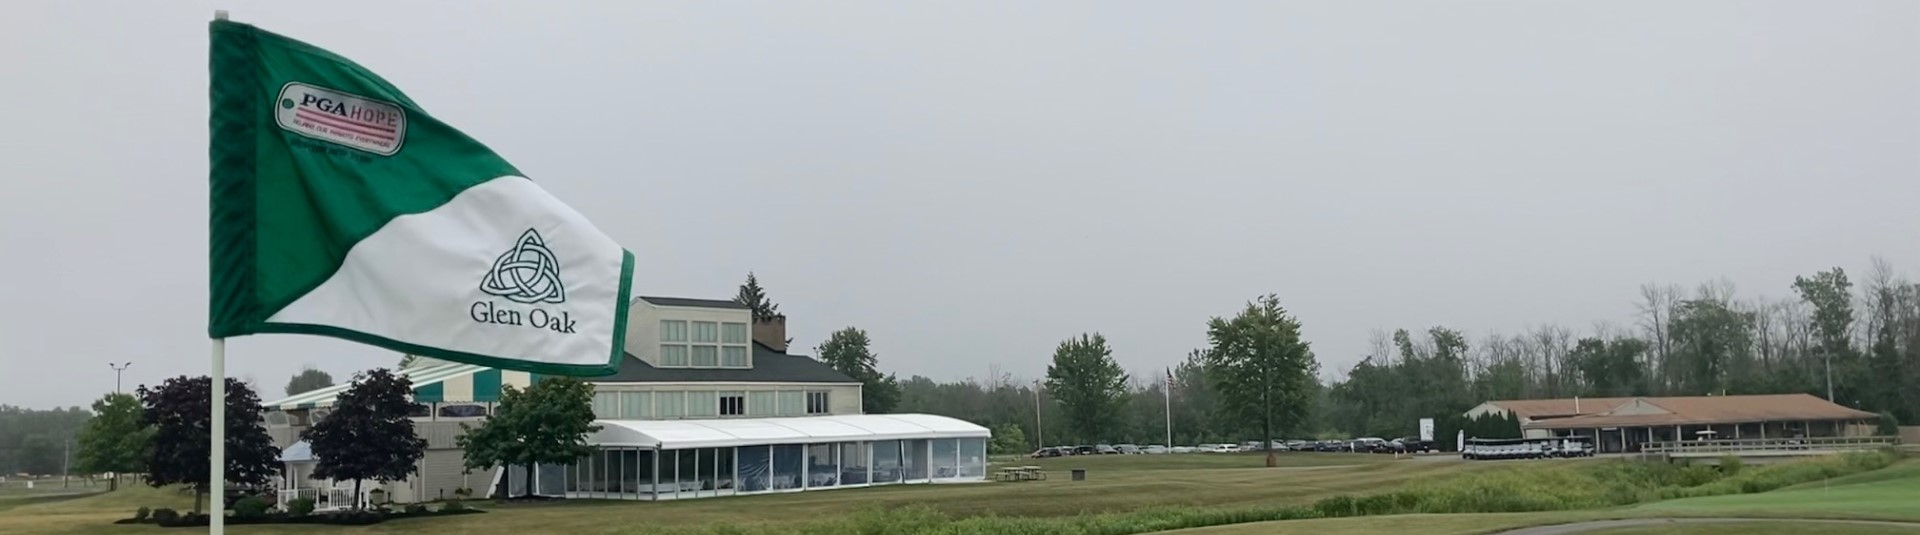 golf course flag and clubhouse